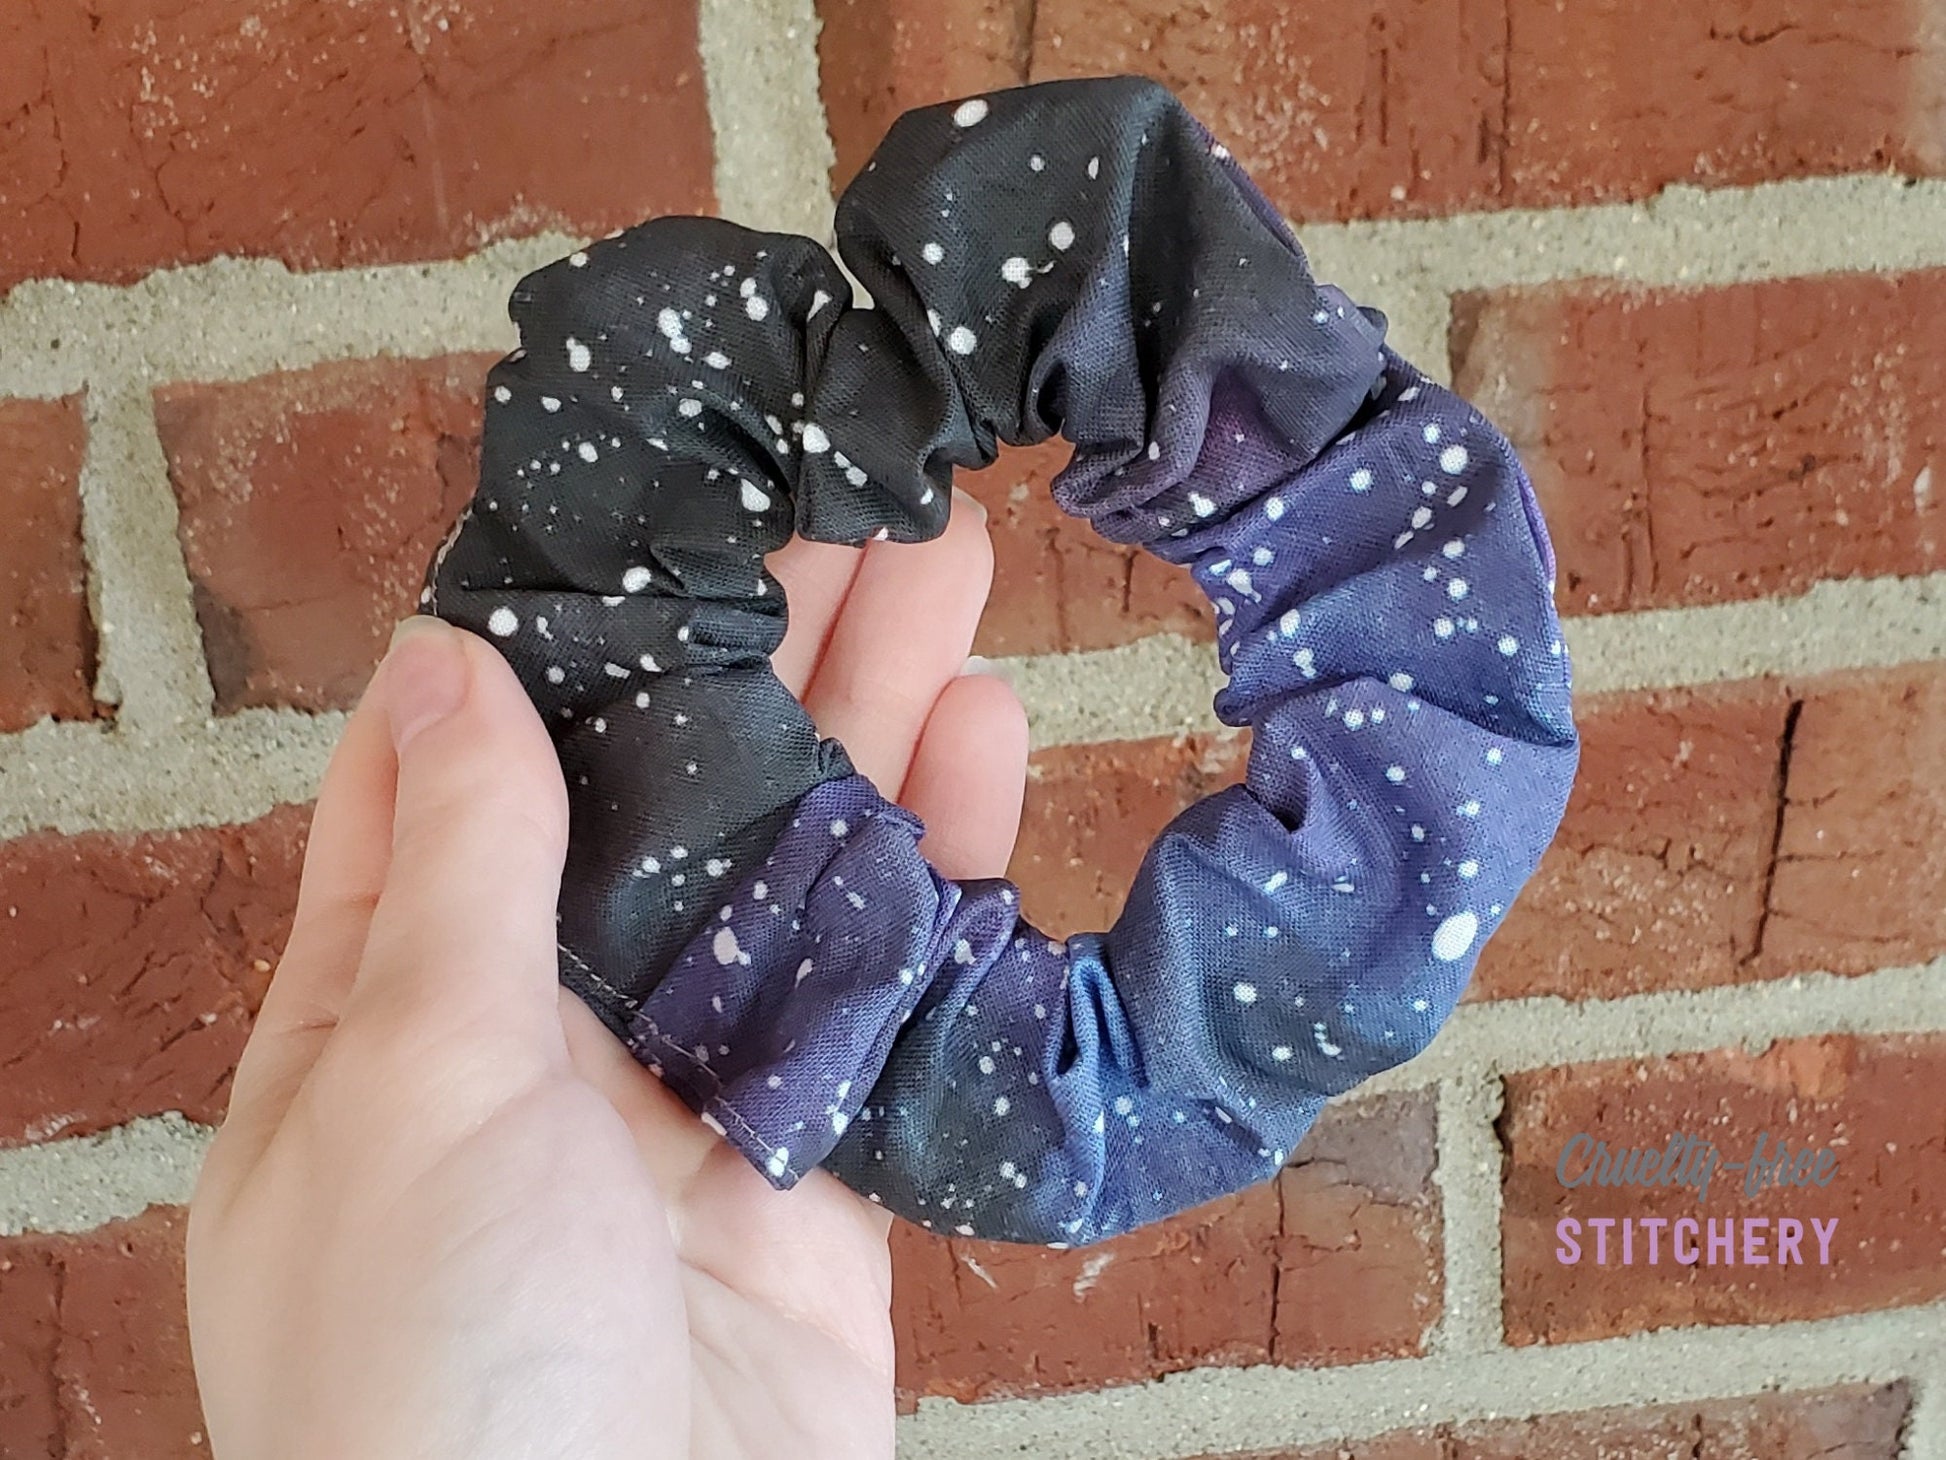 A galaxy print scrunchie. The background color is various shades of black, dark blue, and dark purple with small white dots.